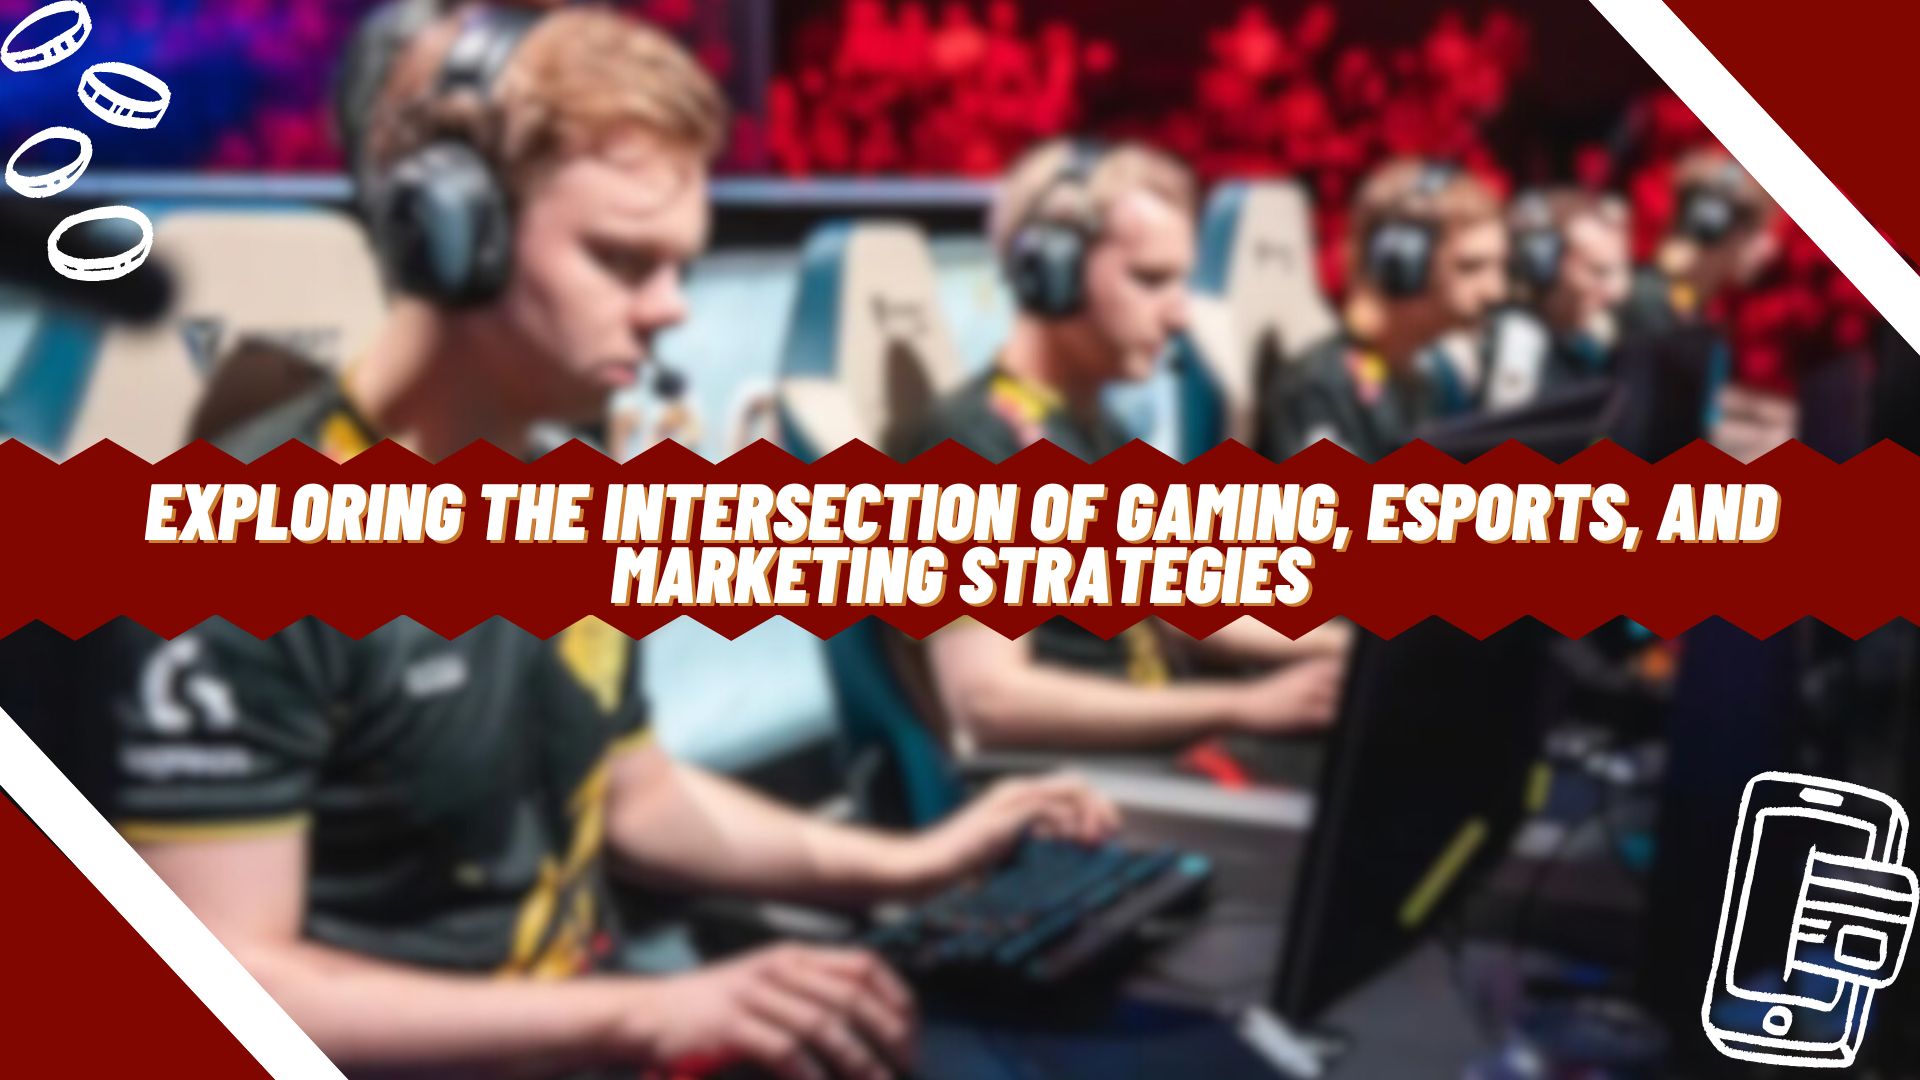 Exploring the Intersection of Gaming, eSports, and Marketing Strategies